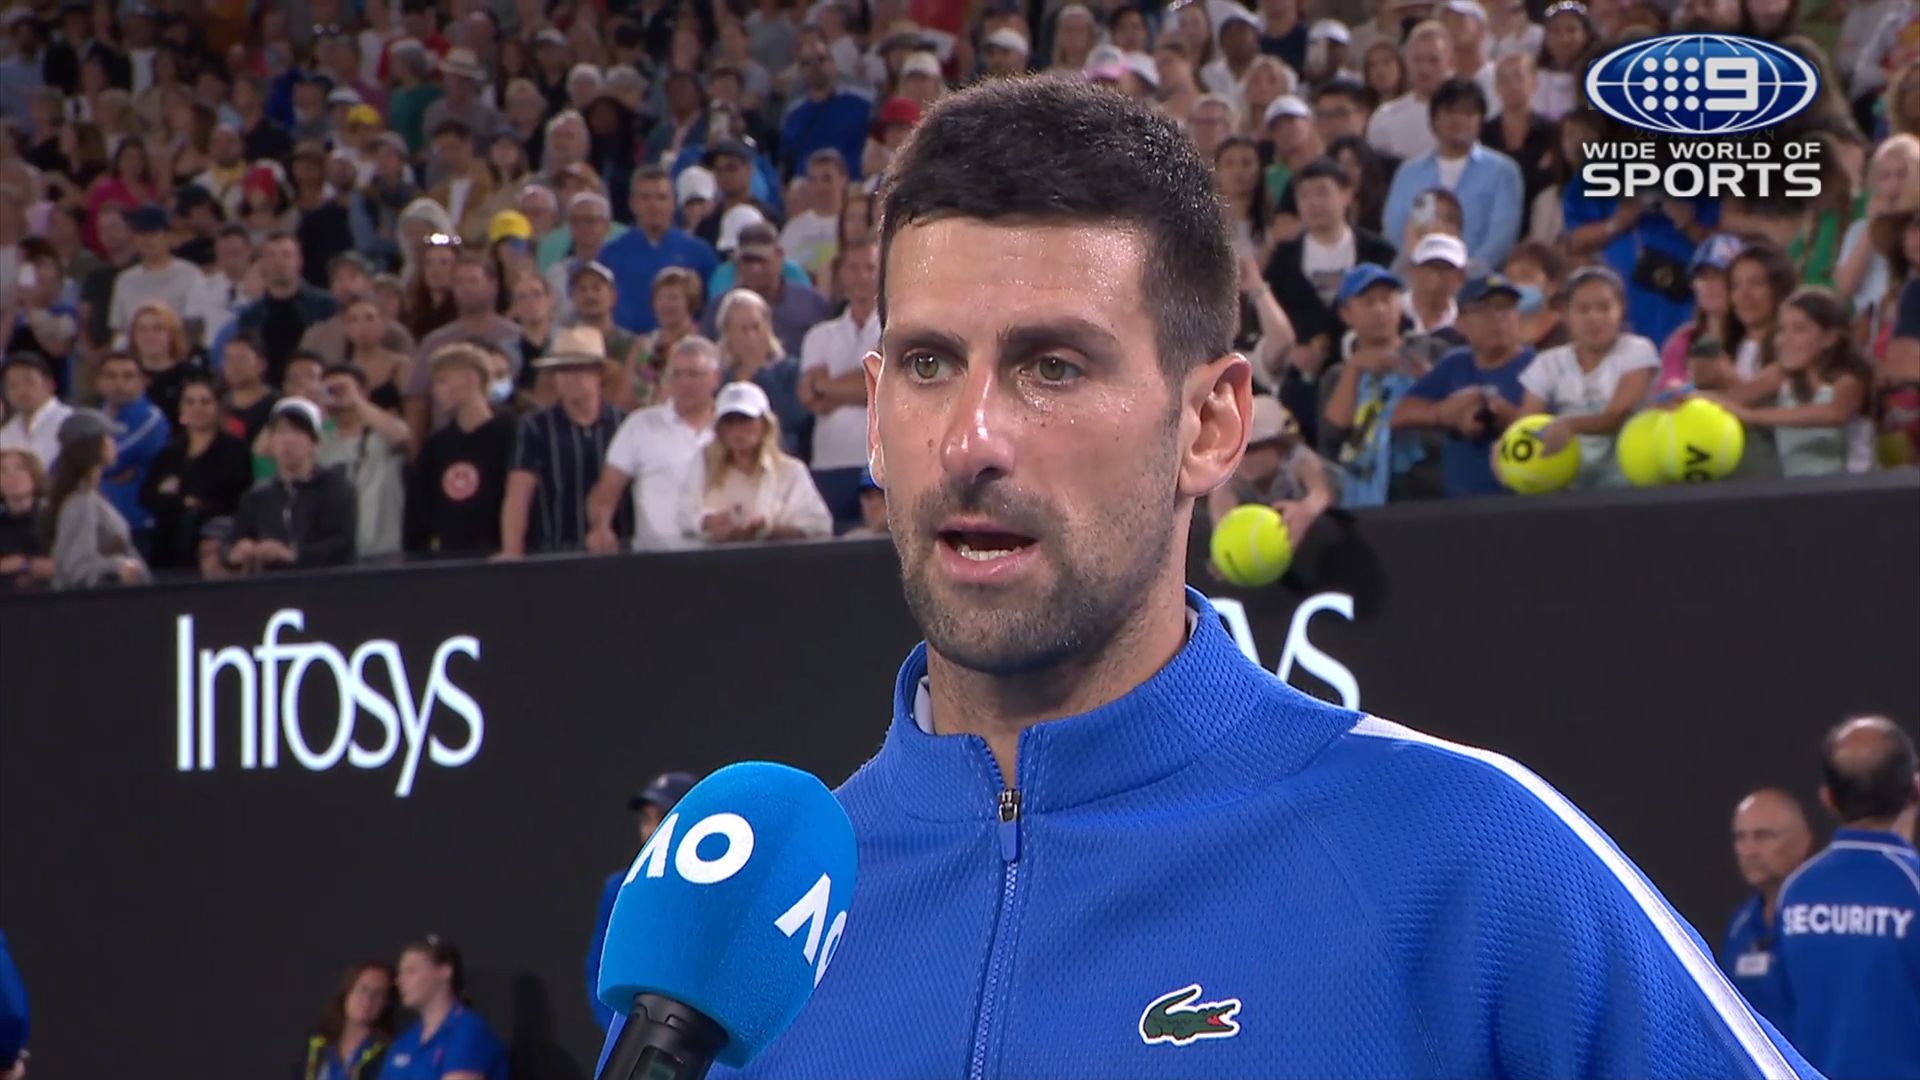 'Five or six hours': Novak Djokovic's ruthless comment after thrashing Frenchman